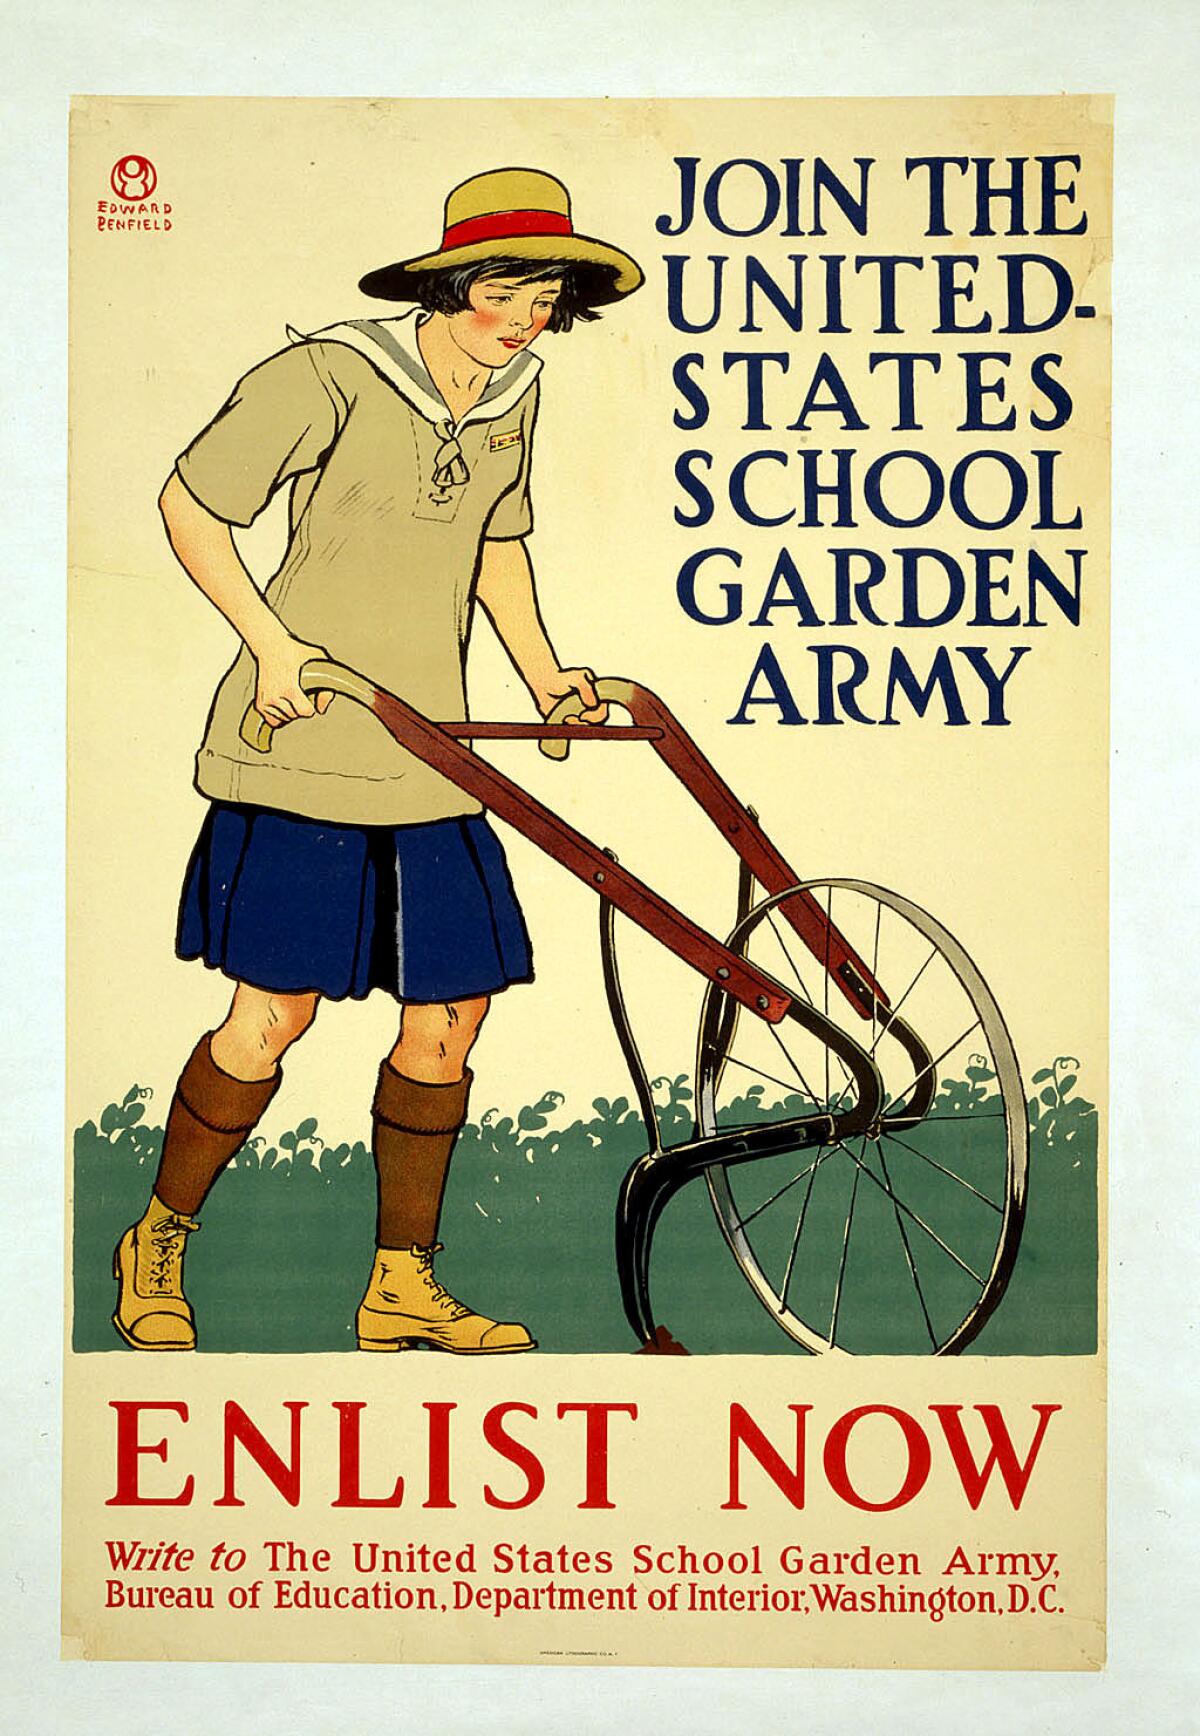 Even children were recruited to "fight" in World War I, as part of the United States School Garden Army.